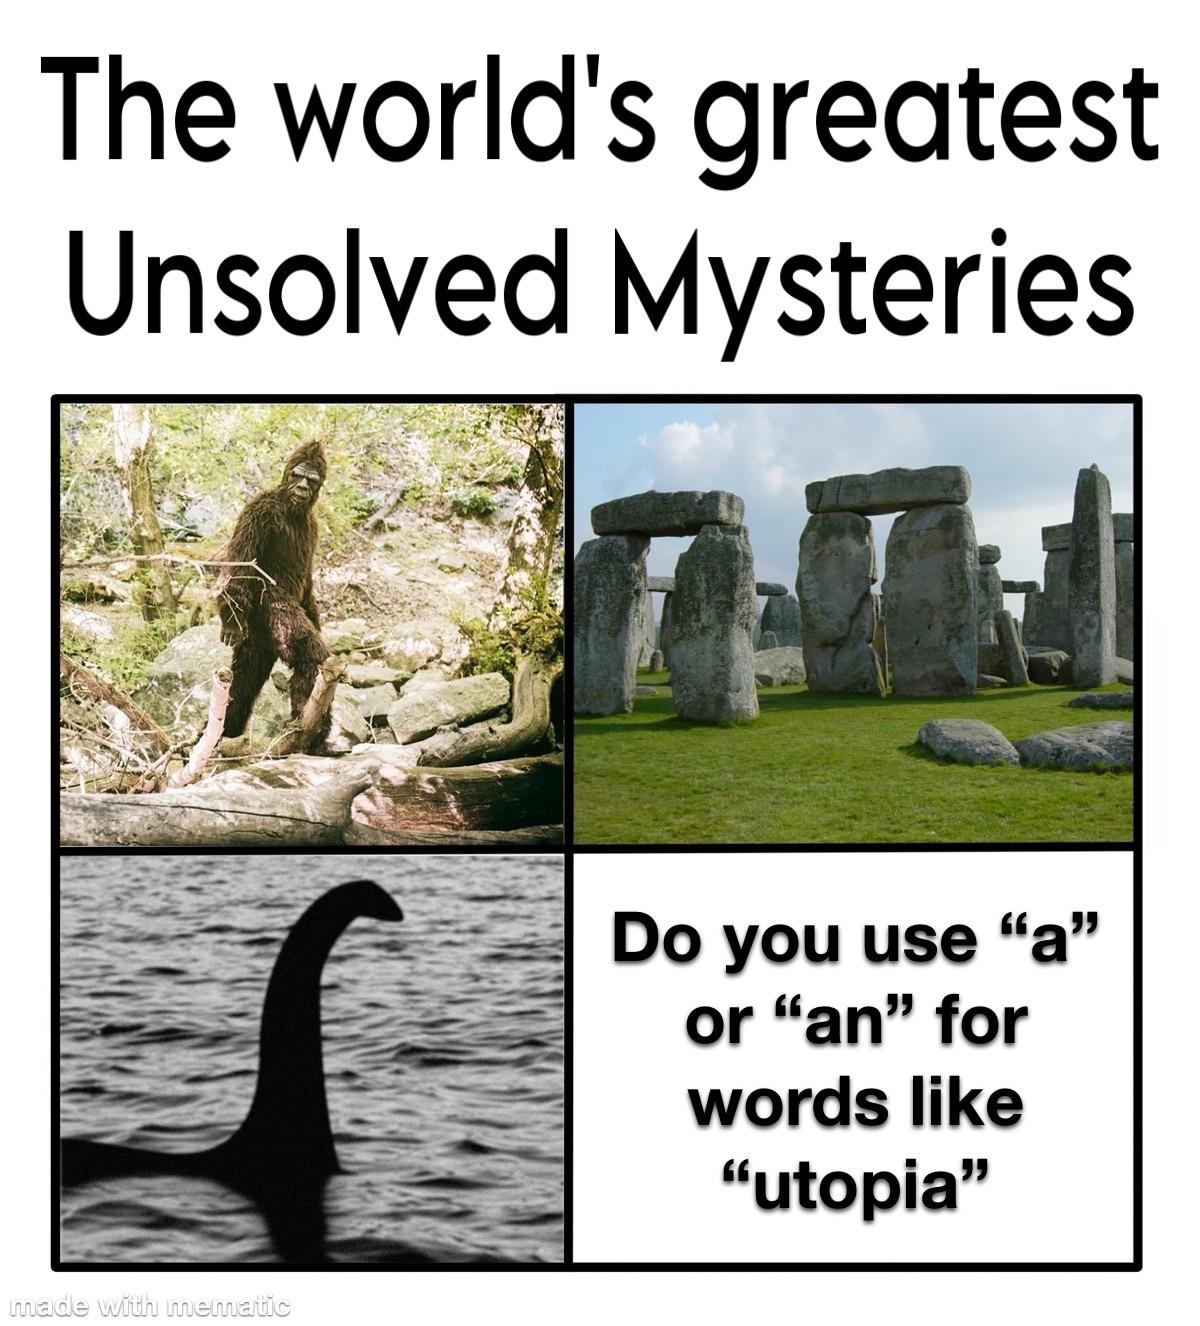 funny memes and pics - stonehenge - The world's greatest Unsolved Mysteries made with mematic Do you use "a" or "an" for words "utopia"